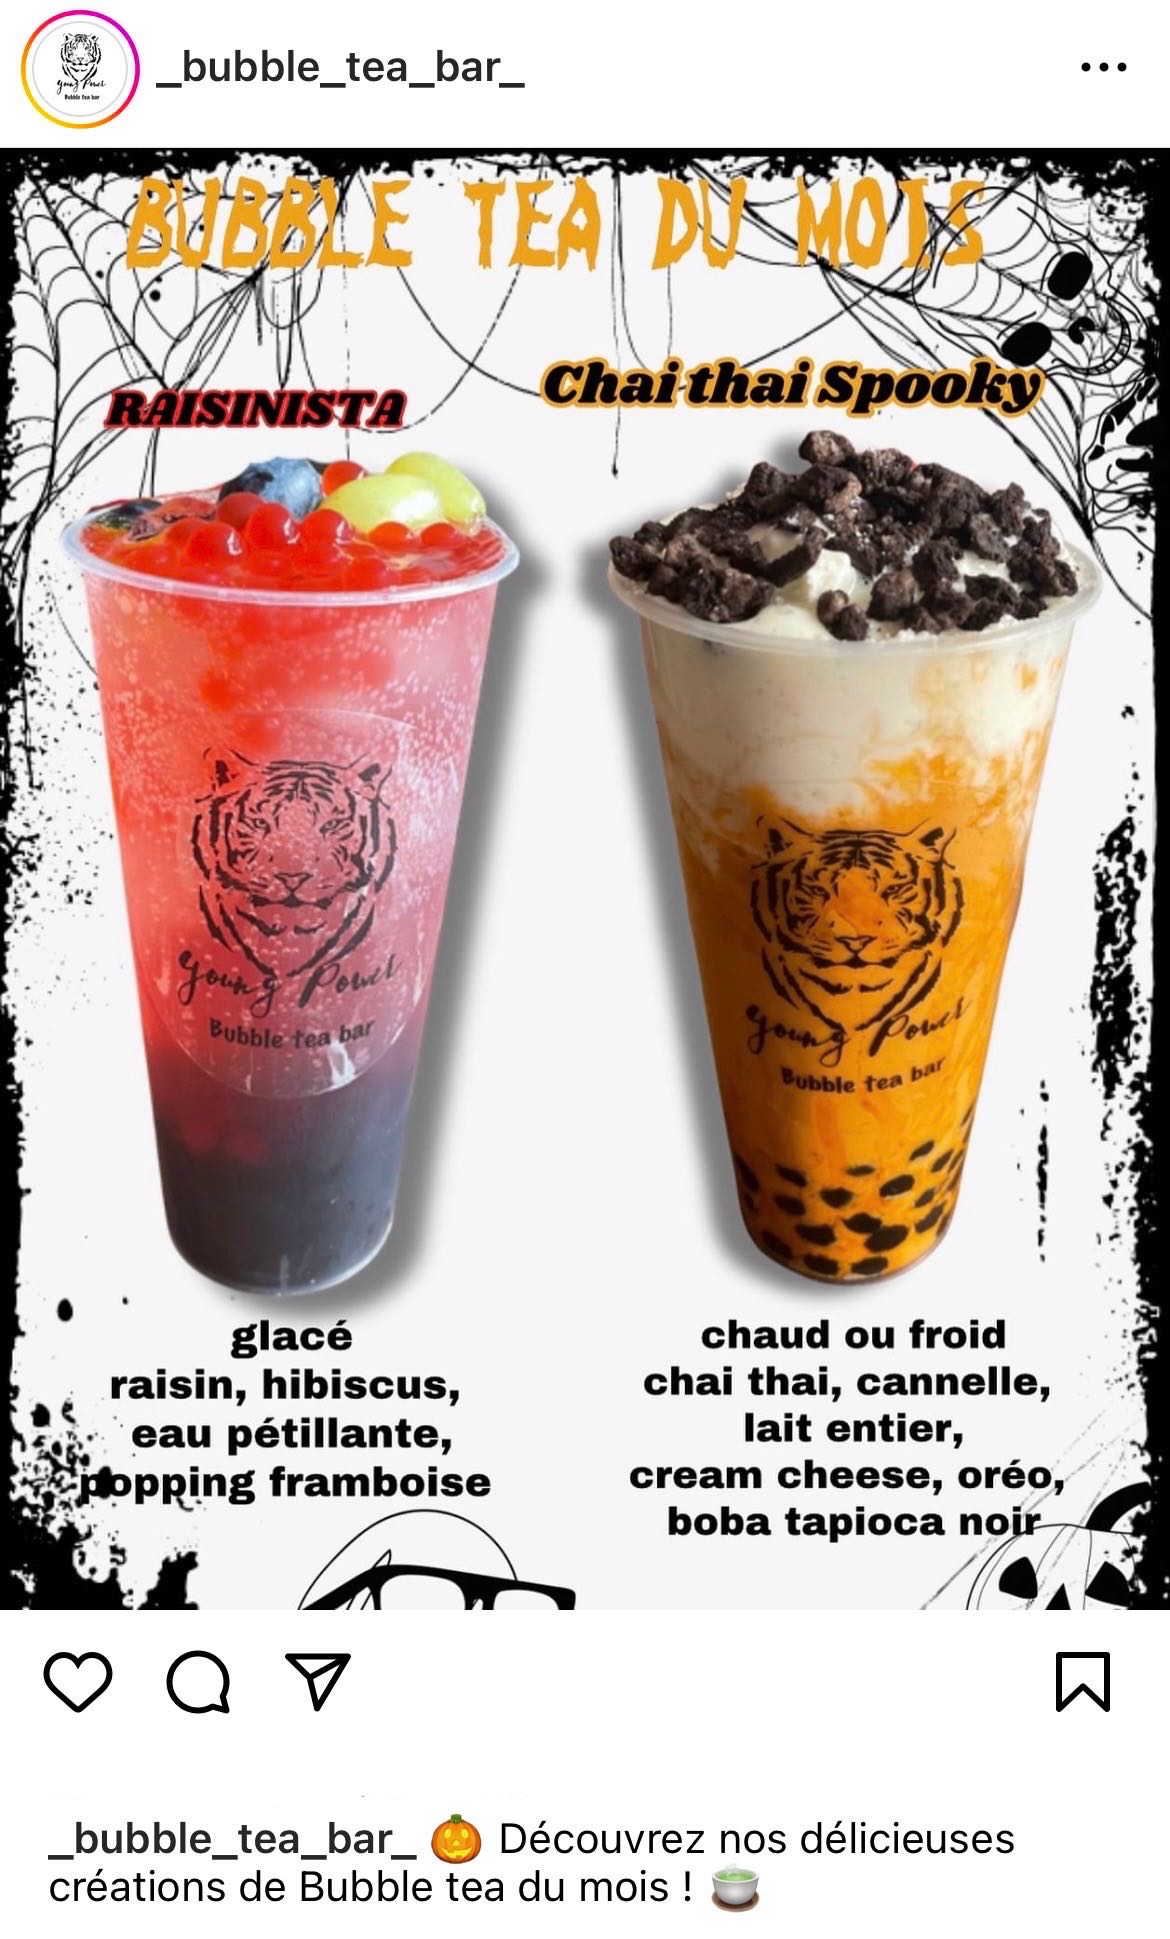 A Halloween drink from a bubble tea shop